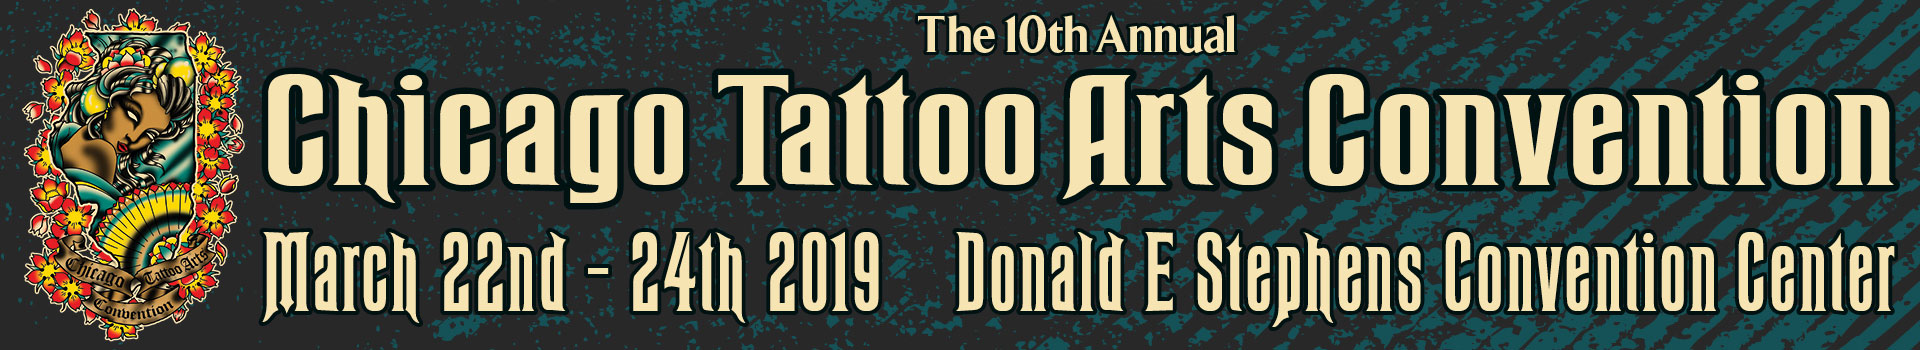 Chicago Tattoo Arts Convention Welcomes the Worlds Best Tattoo Artists   UrbanMatter